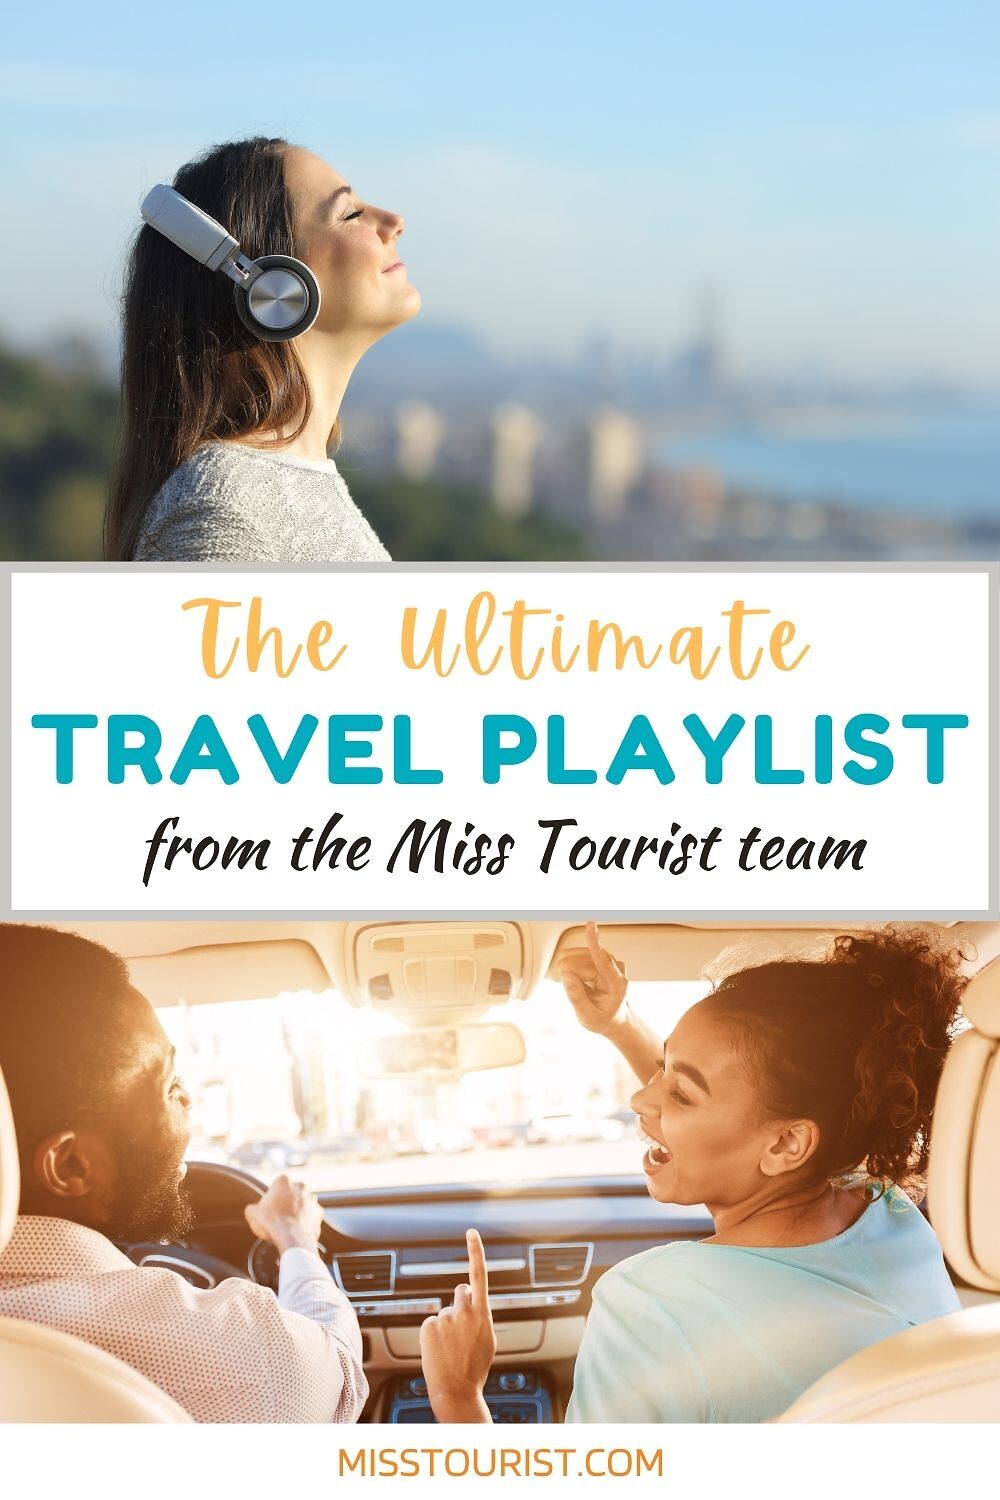 Top image: Woman wearing headphones enjoying music with a scenic background. Bottom image: Man and woman enthusiastically singing in a car. Text: "The Ultimate Travel Playlist from the Miss Tourist team.